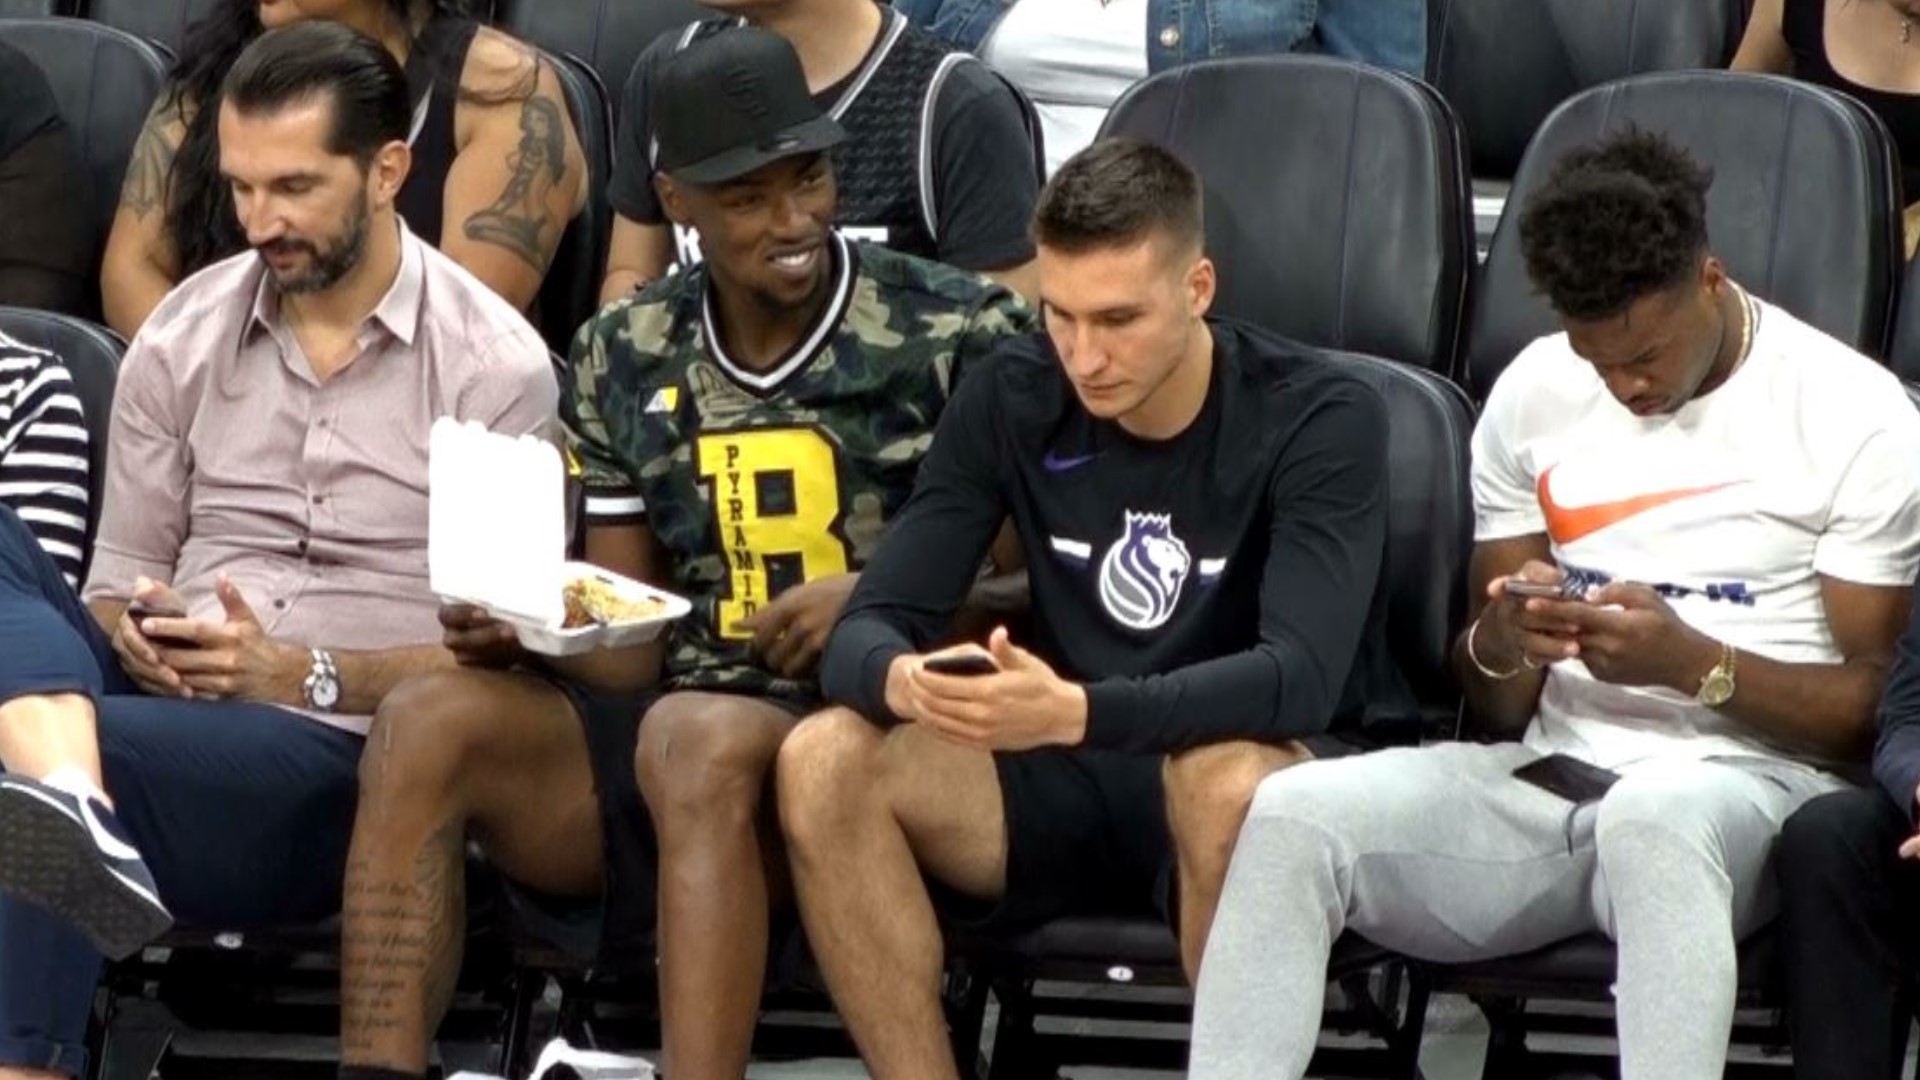 When hoops are life, but so is orange chicken. 

Harry Giles joins his Kings teammates and members of the front office, bringing Panda Express with him to his courtside seats at the California Classic NBA summer league in Sacramento.